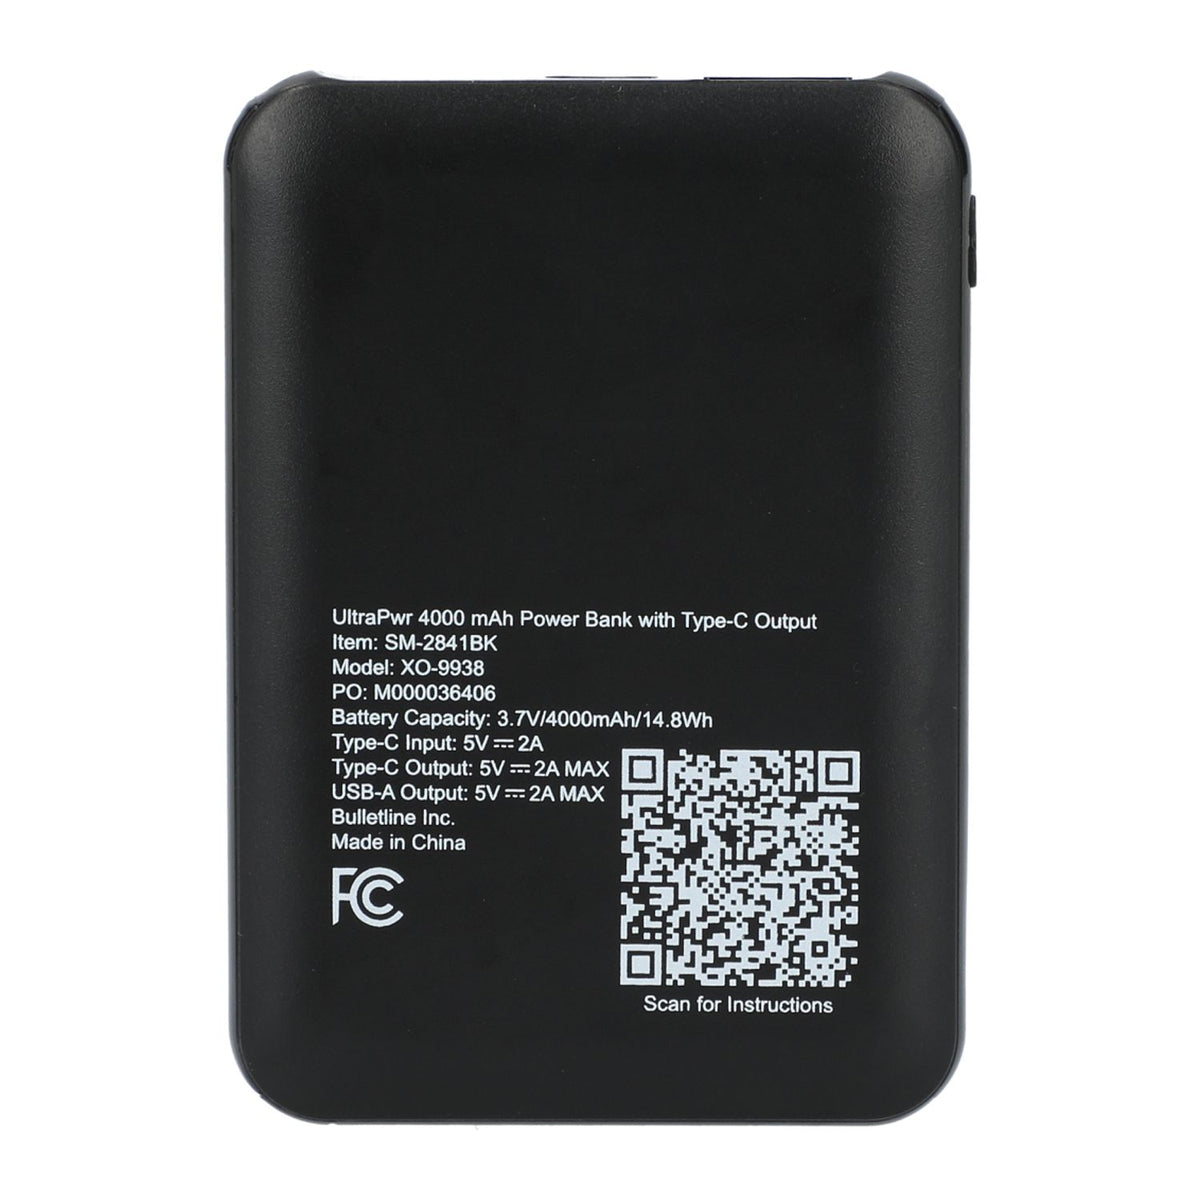 UltraPwr 4000 mAh Power Bank with Type-C Output